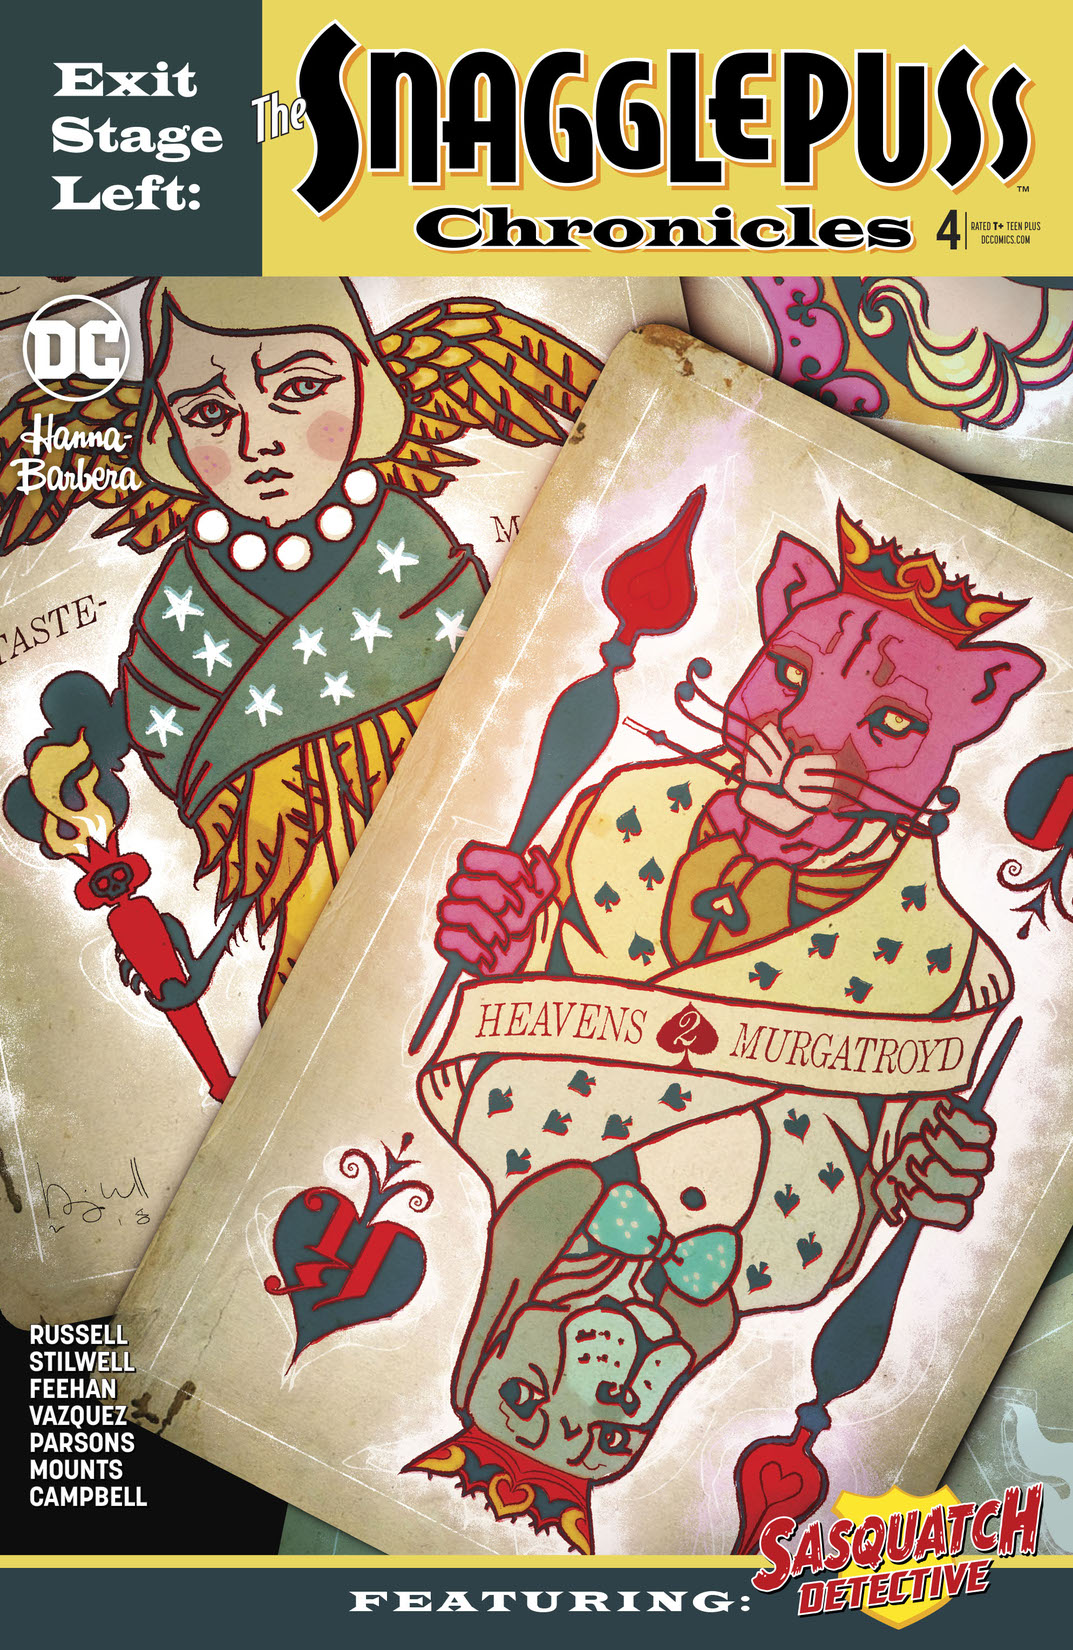 Exit Stage Left: The Snagglepuss Chronicles #4 preview images